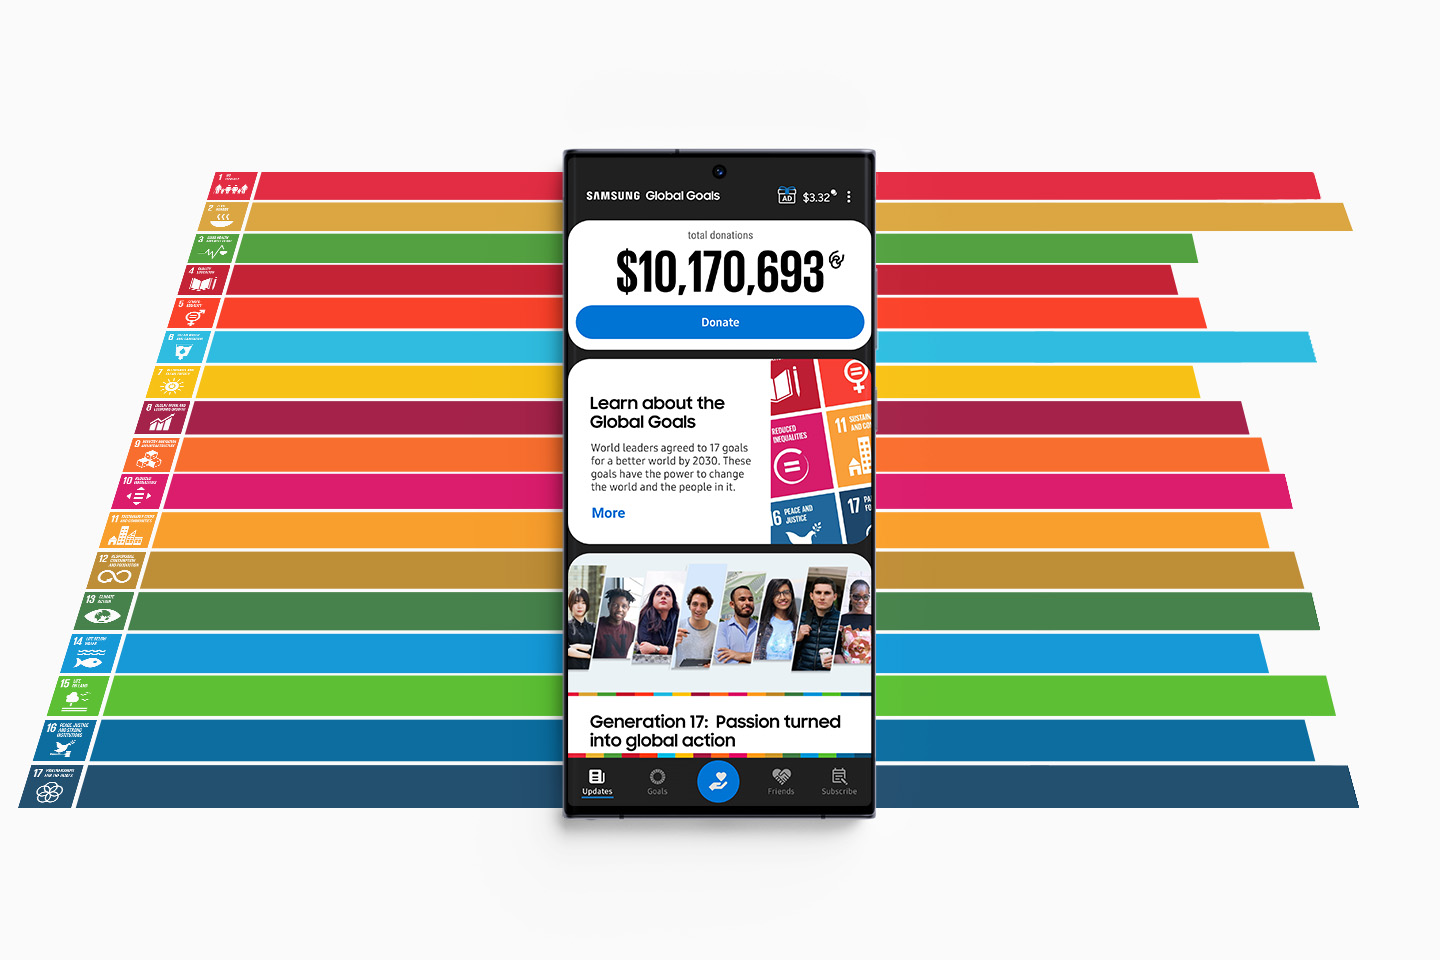 New App Donation Leaderboard Feature of Samsung Global Goals App